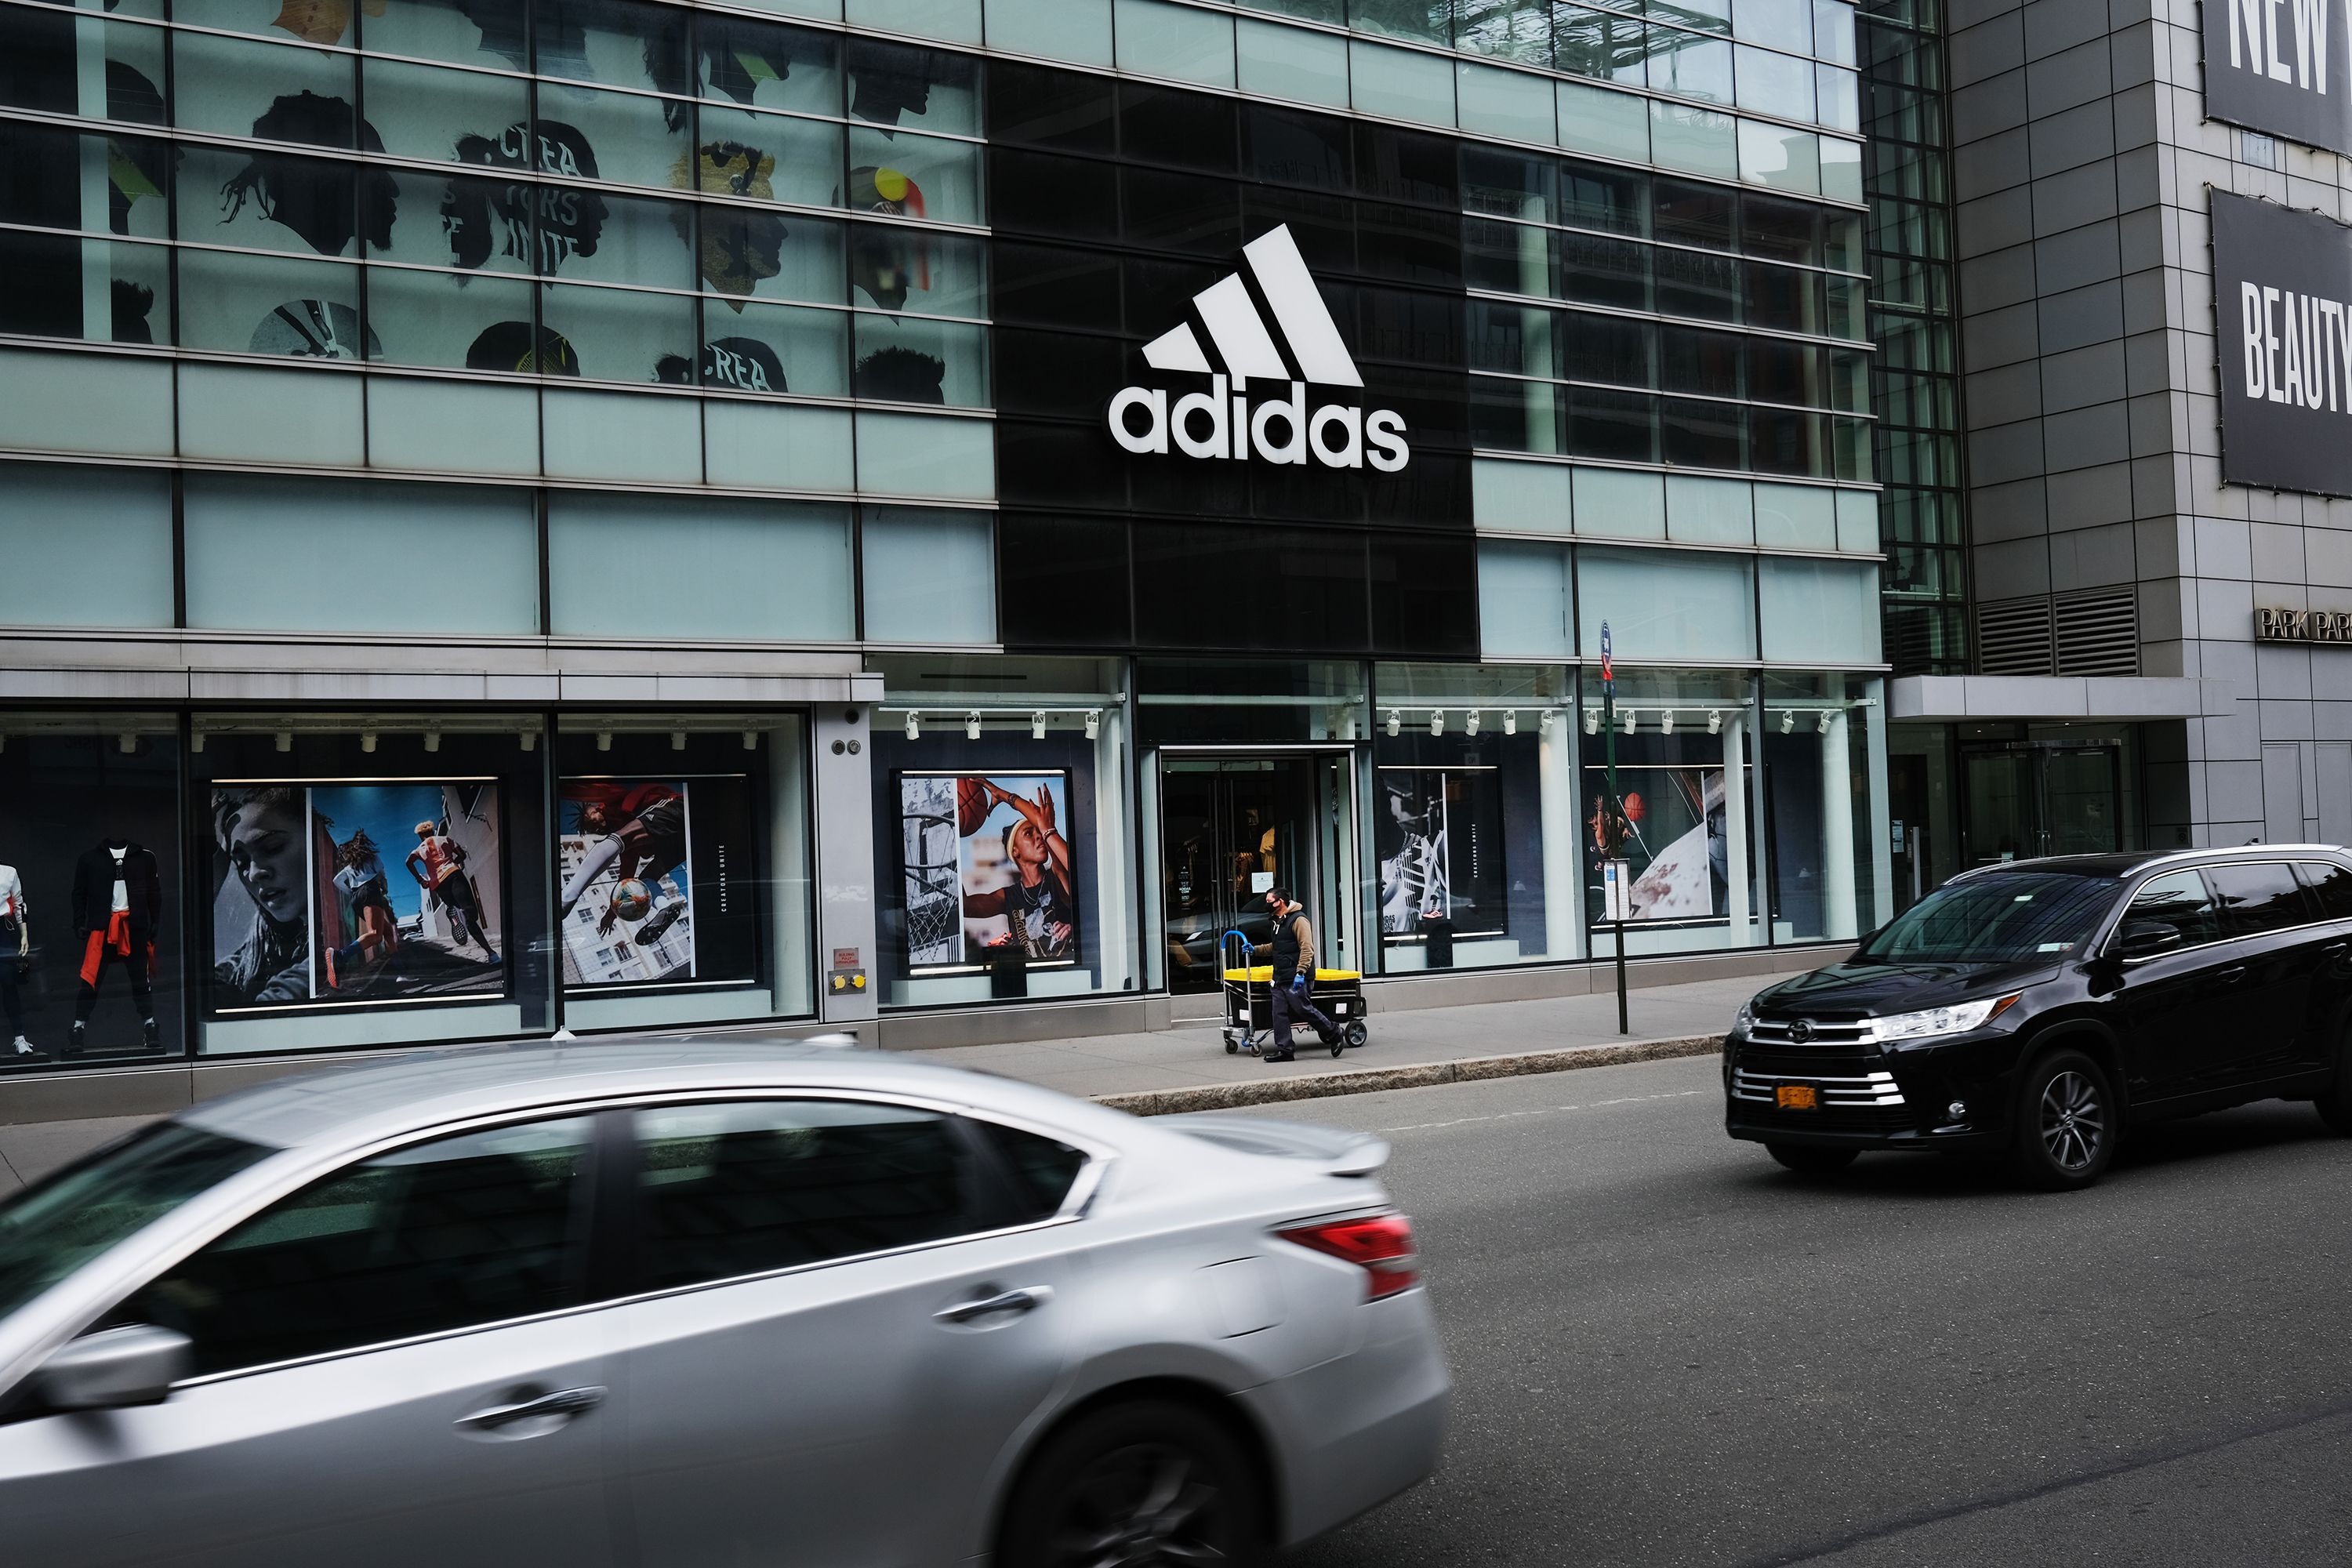 oficial Contrapartida Patatas Adidas employees want company to investigate HR chief for response to  racial issues | CNN Business